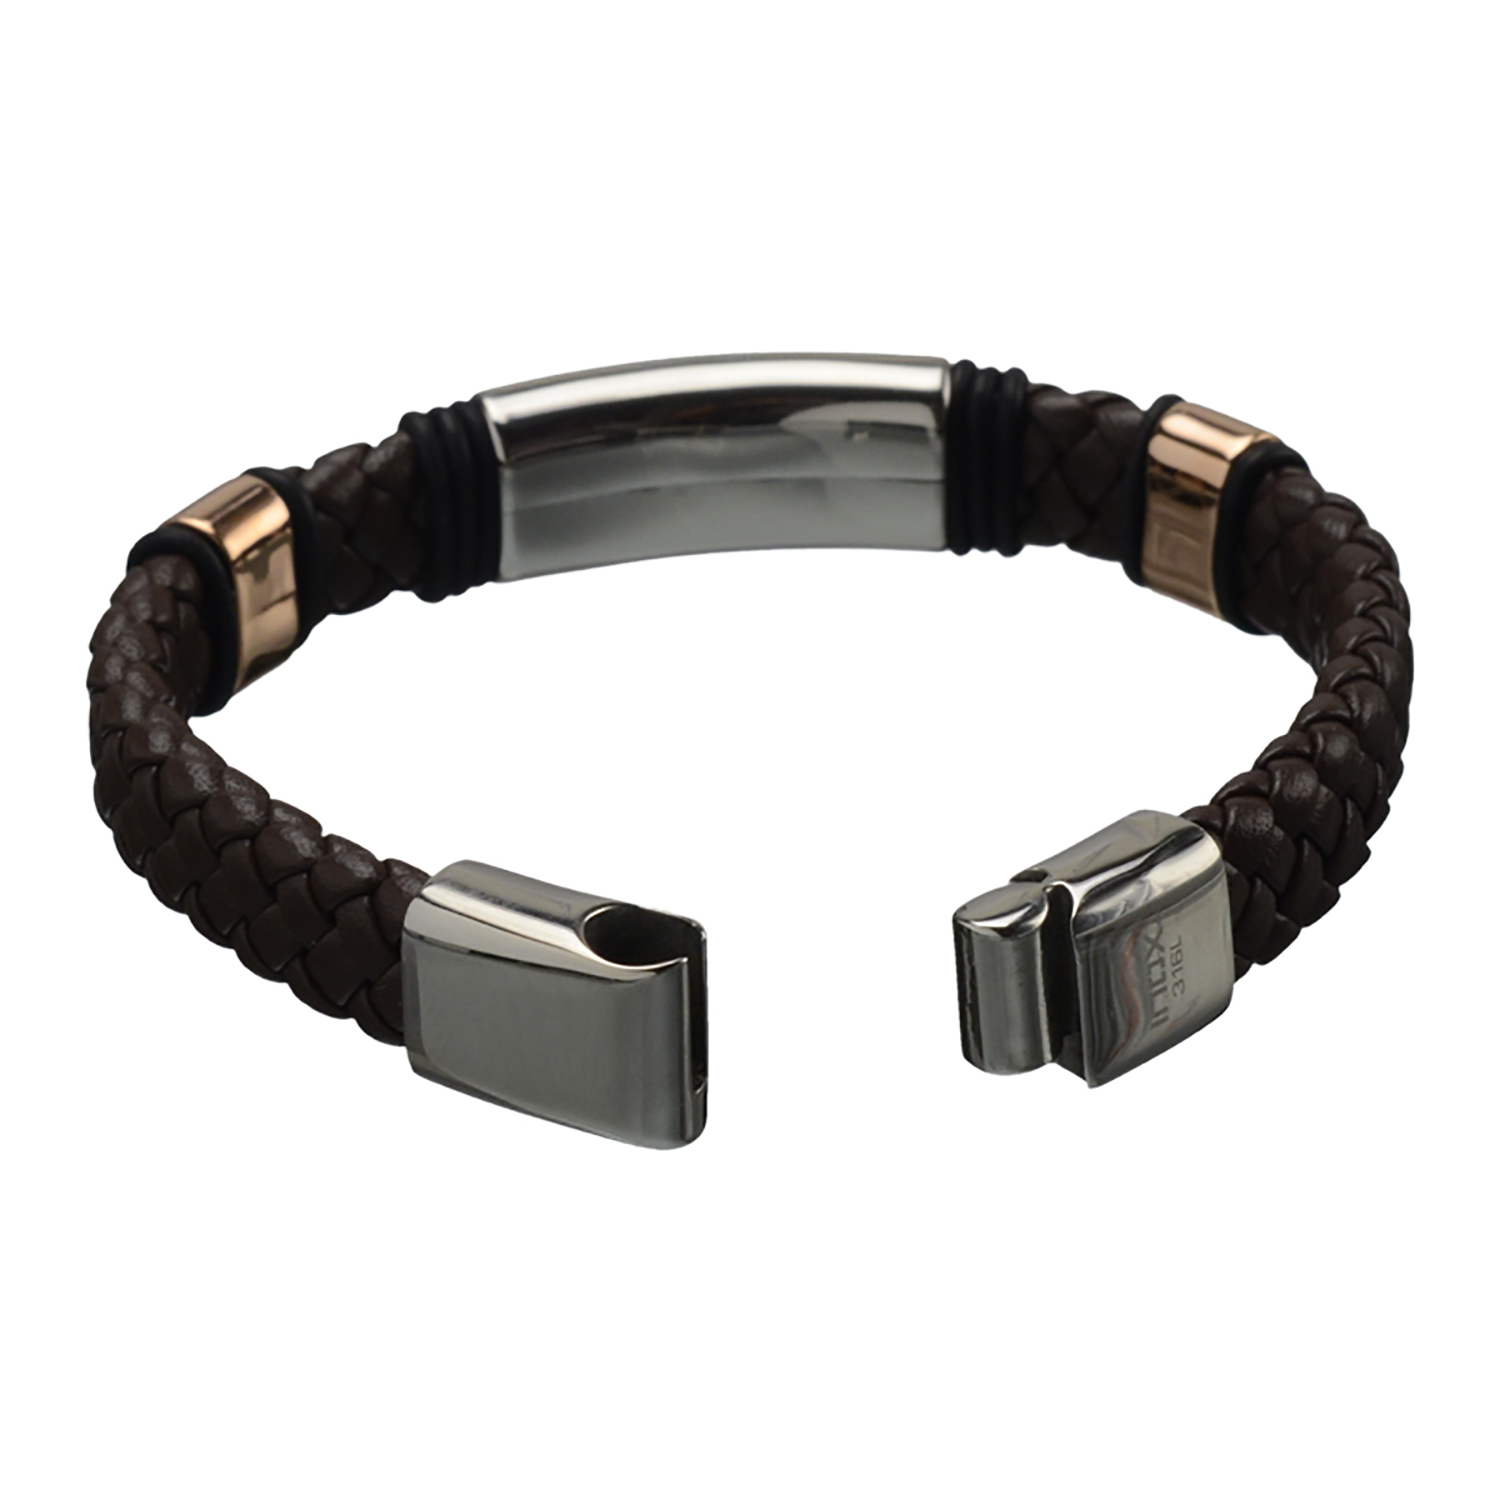 Brown Leather Bracelet with Buckle Closure Image 2 Enchanted Jewelry Plainfield, CT